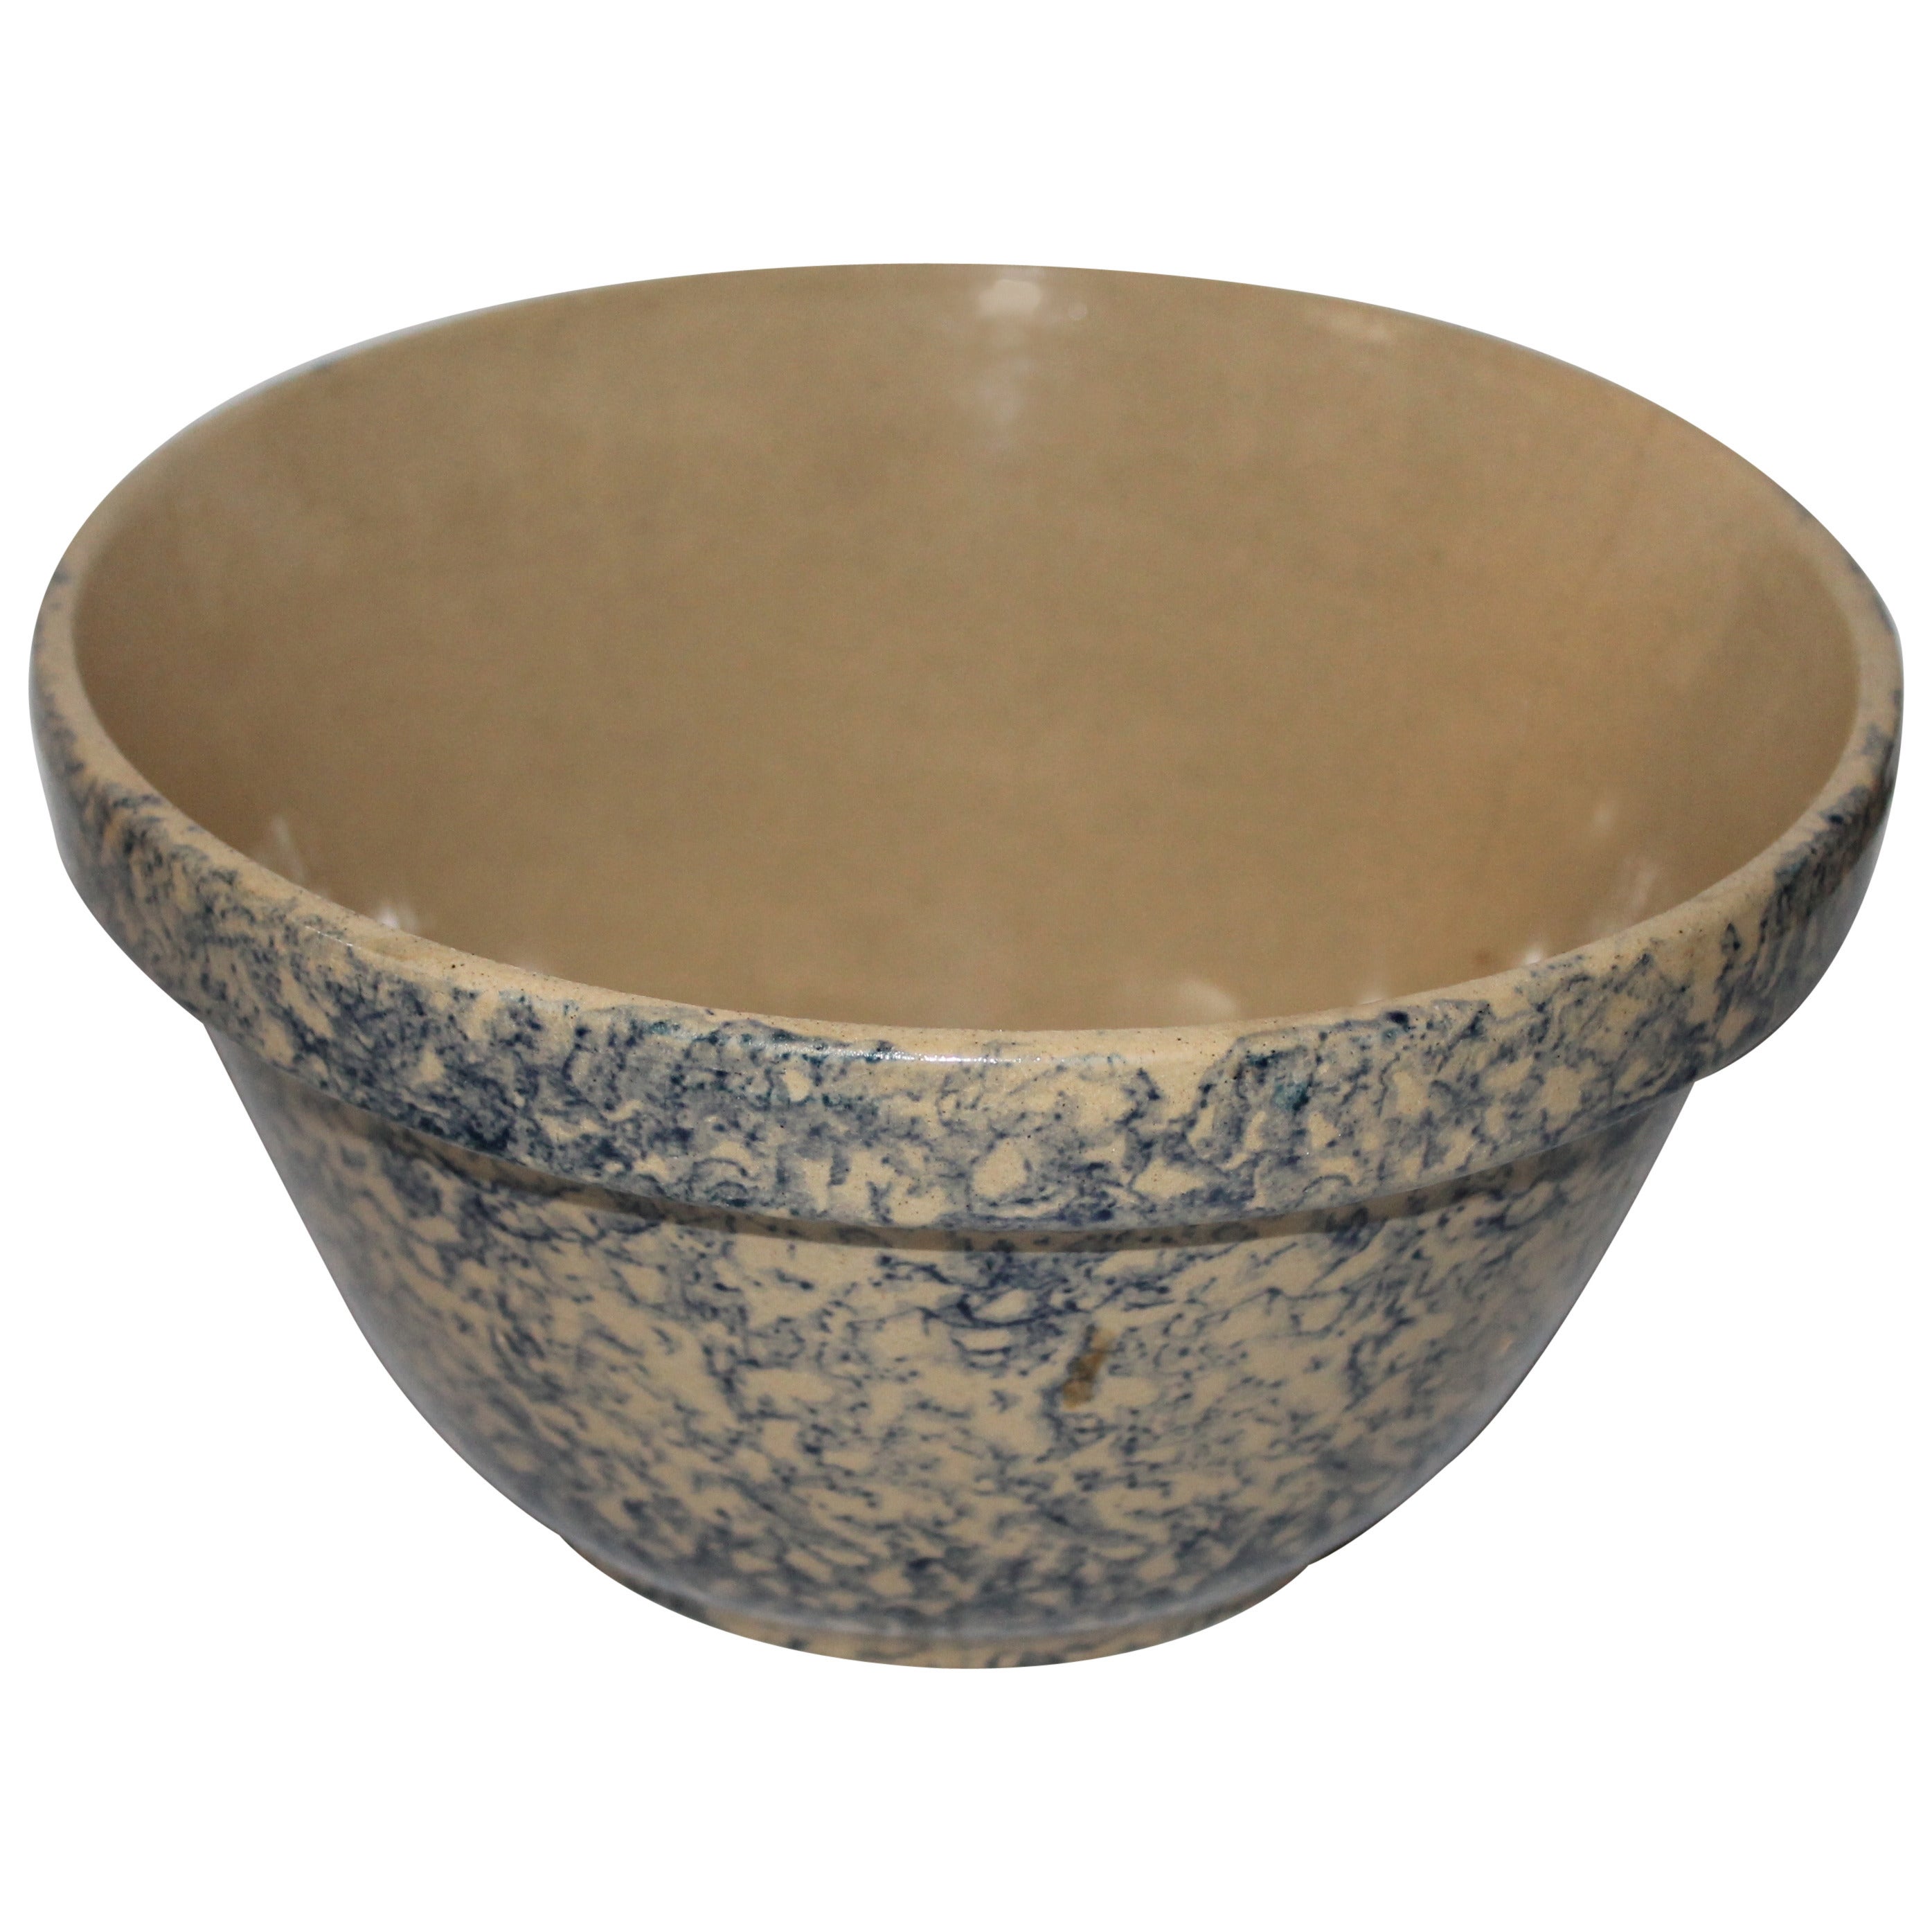 Early 20th Century Sponge Ware Mixing Bowl For Sale